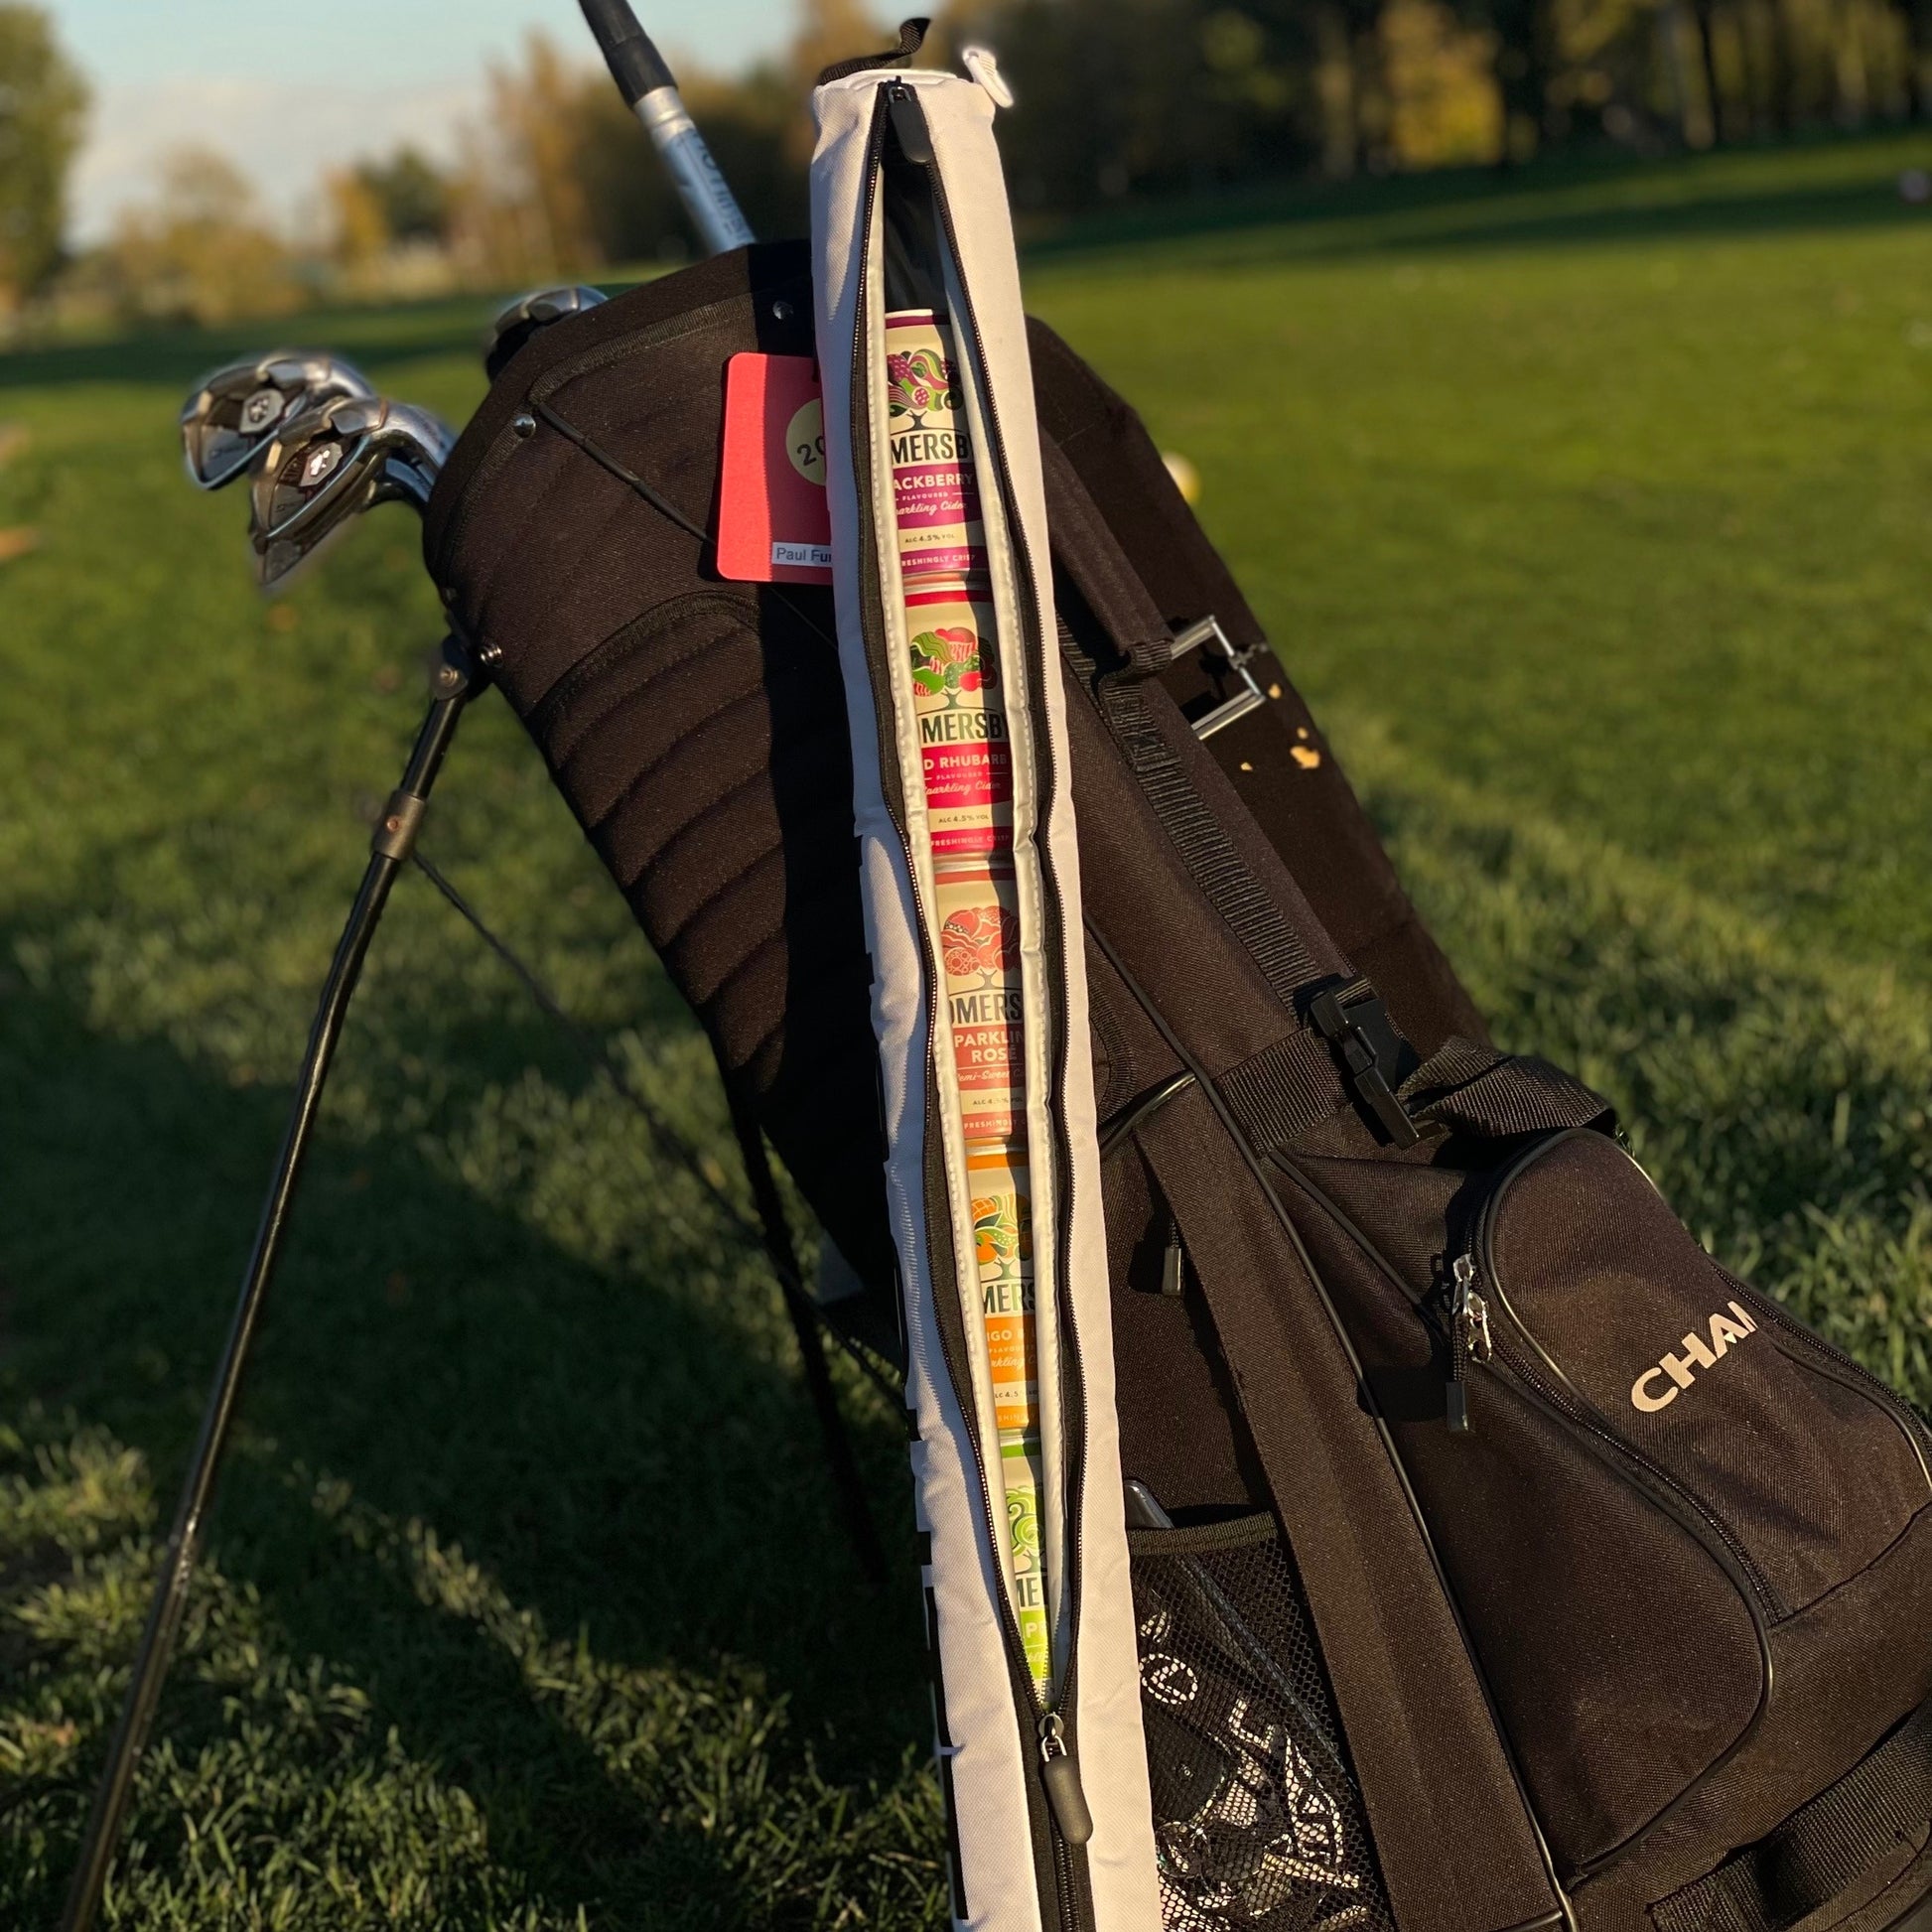 Beer Buddy is the ultimate golf course companion for anyone who loves a cold drink while playing a round of golf. Its round, insulated structure is designed to hold up to 5 large (0,5l) or 7 regular (0,33l) cans and fits into most standard sized golf bags. Its discreet design keeps your drinks cold and hidden from other players, making sure you're always refreshed and ready for your next shot.